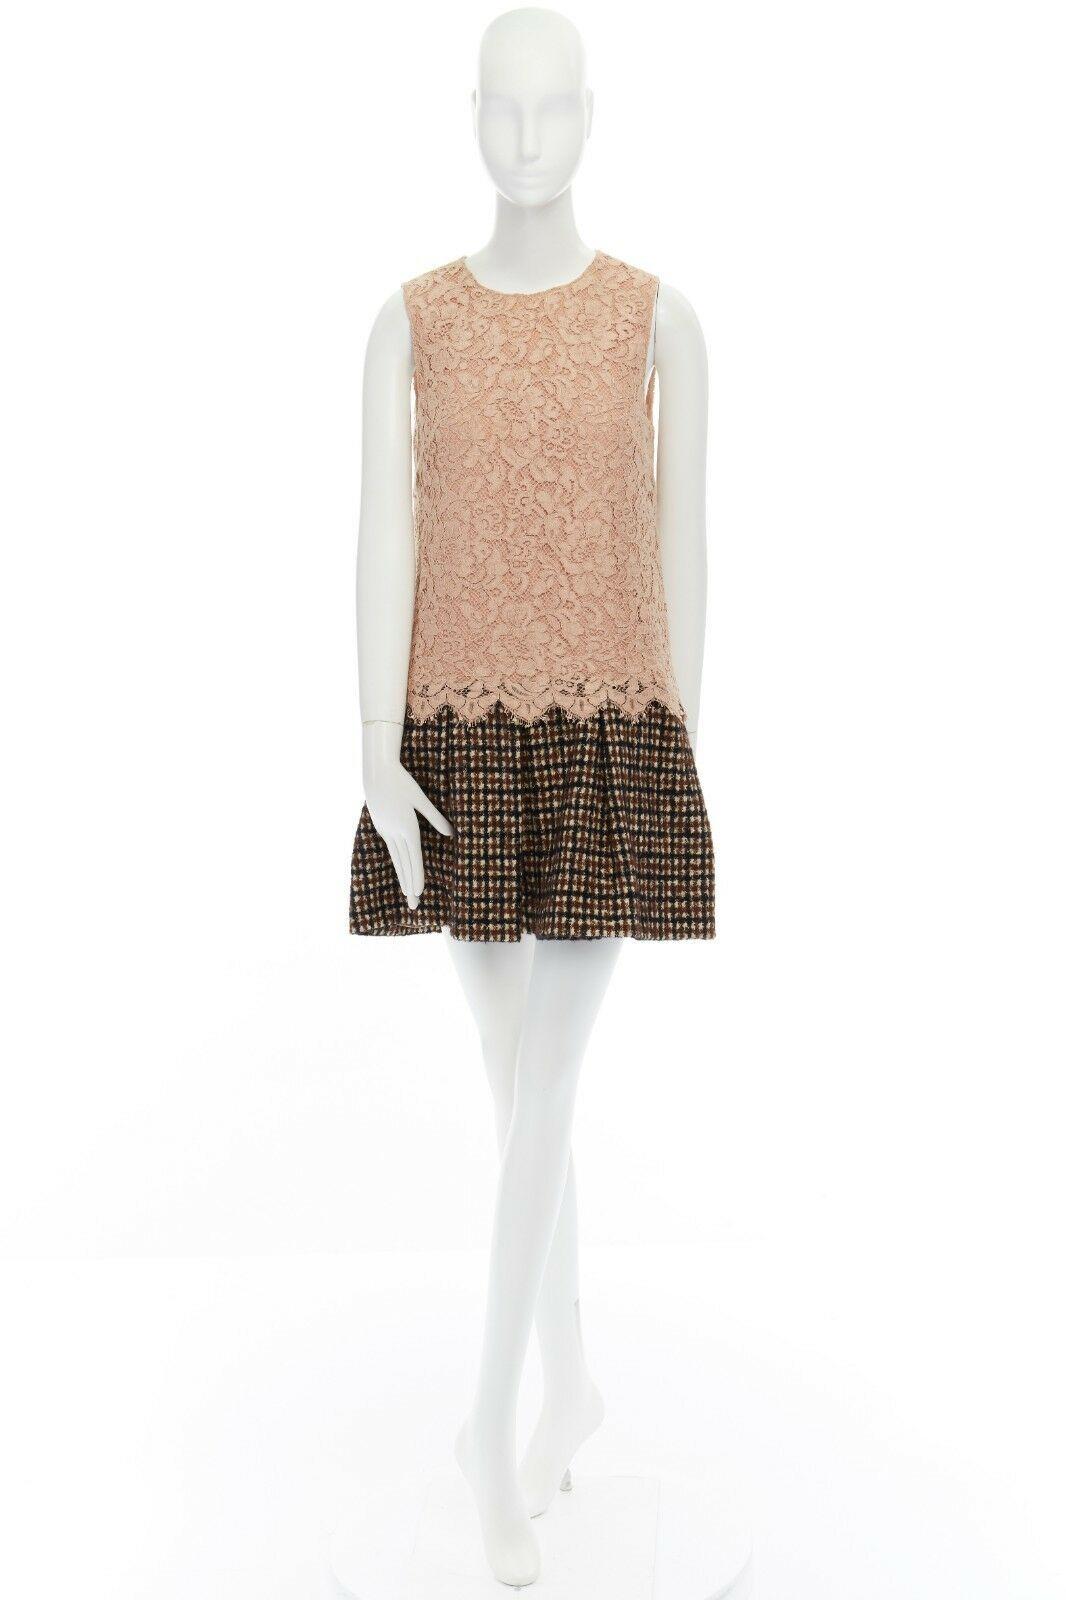 Beige DOLCE GABBANA nude floral lace brown checked wool boucle skirt cocktail dress S